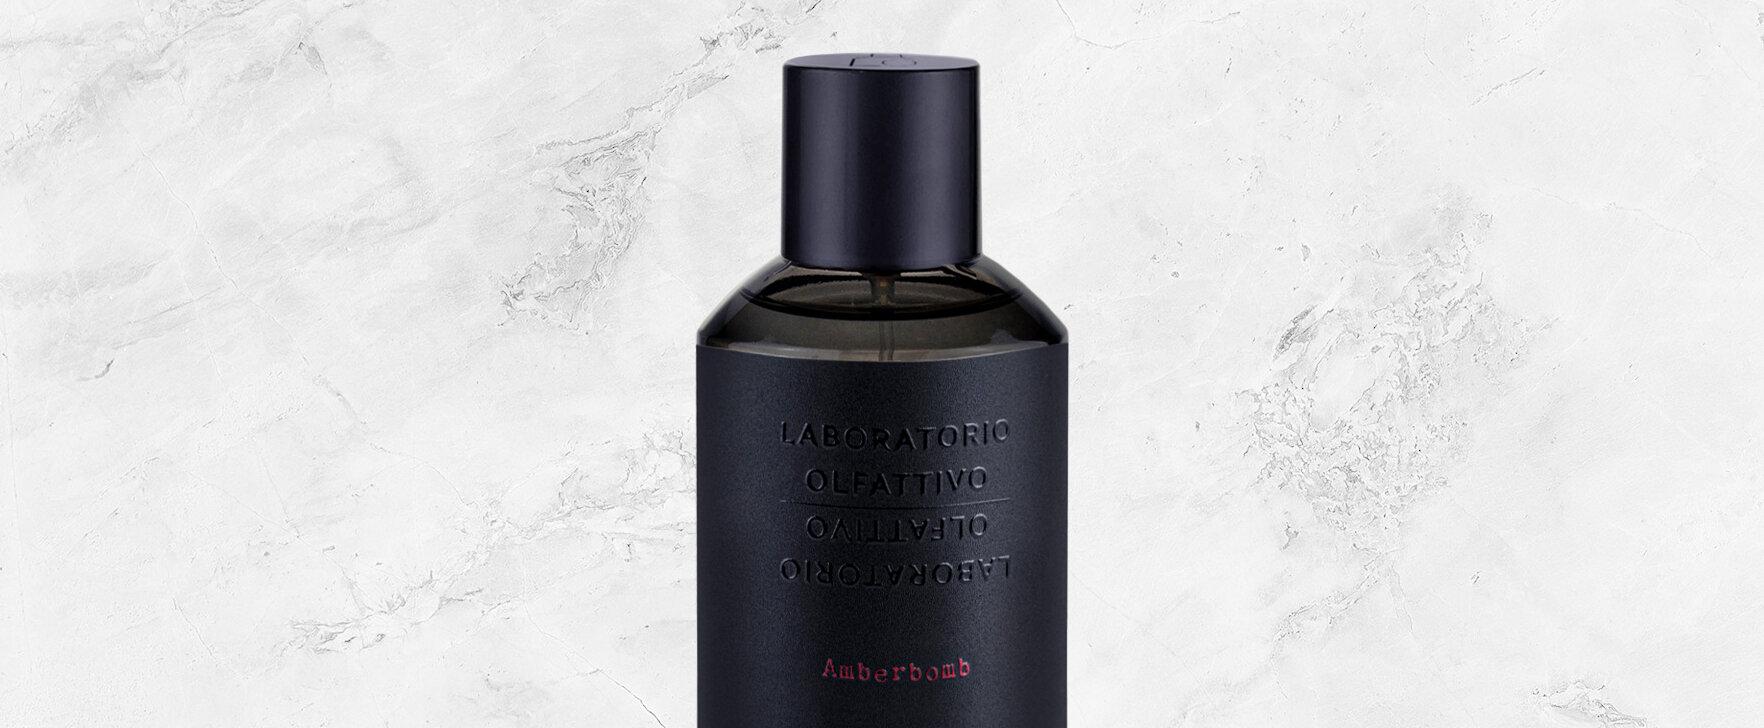 Power and Opulence: The New Intense Amberbomb Fragrance From Laboratorio Olfattivo